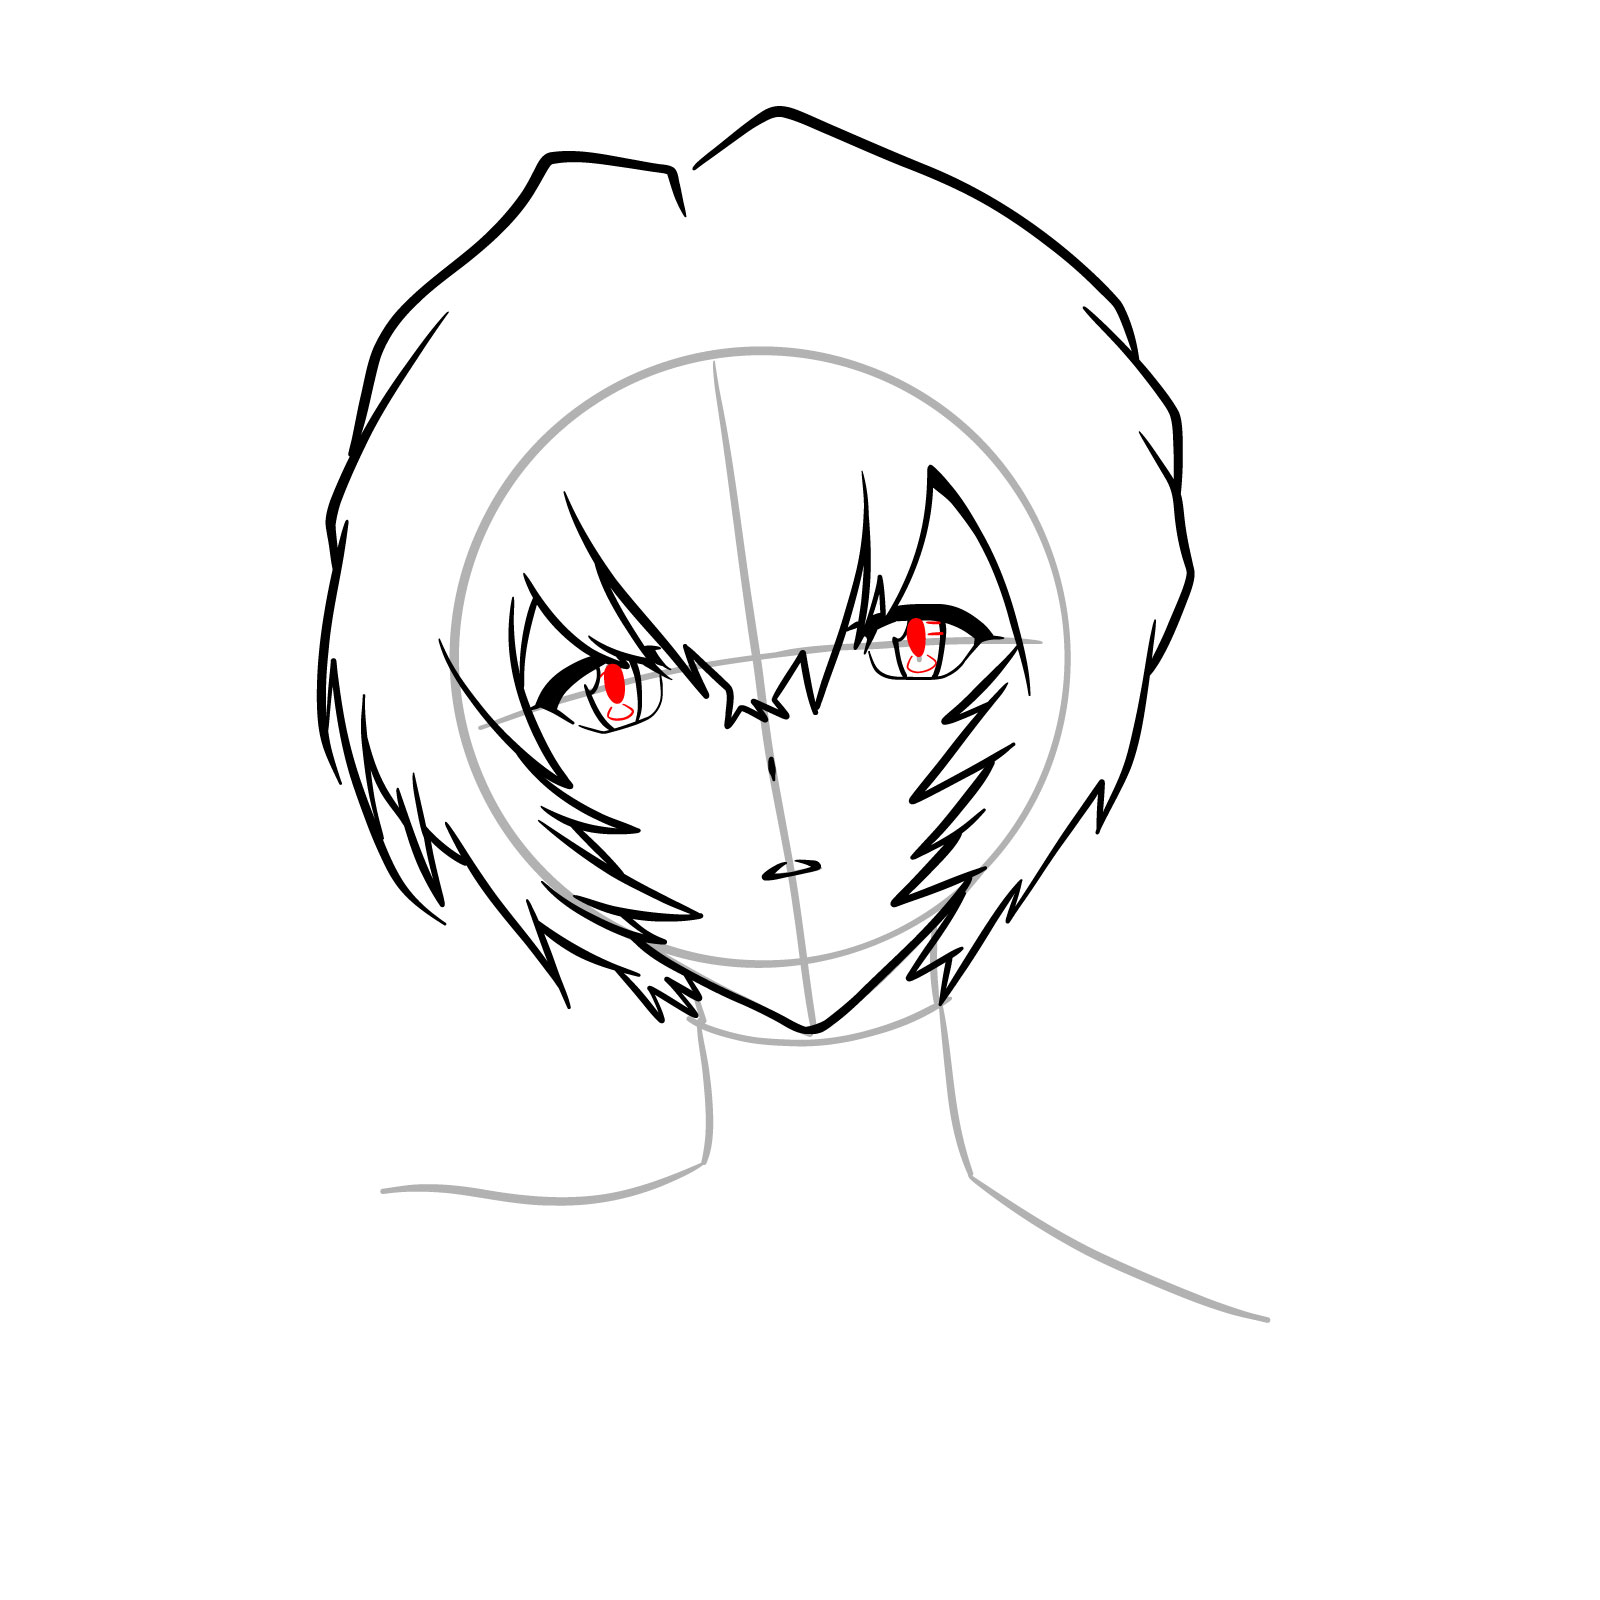 How to draw Rei Ayanami's face - Evangelion - step 12